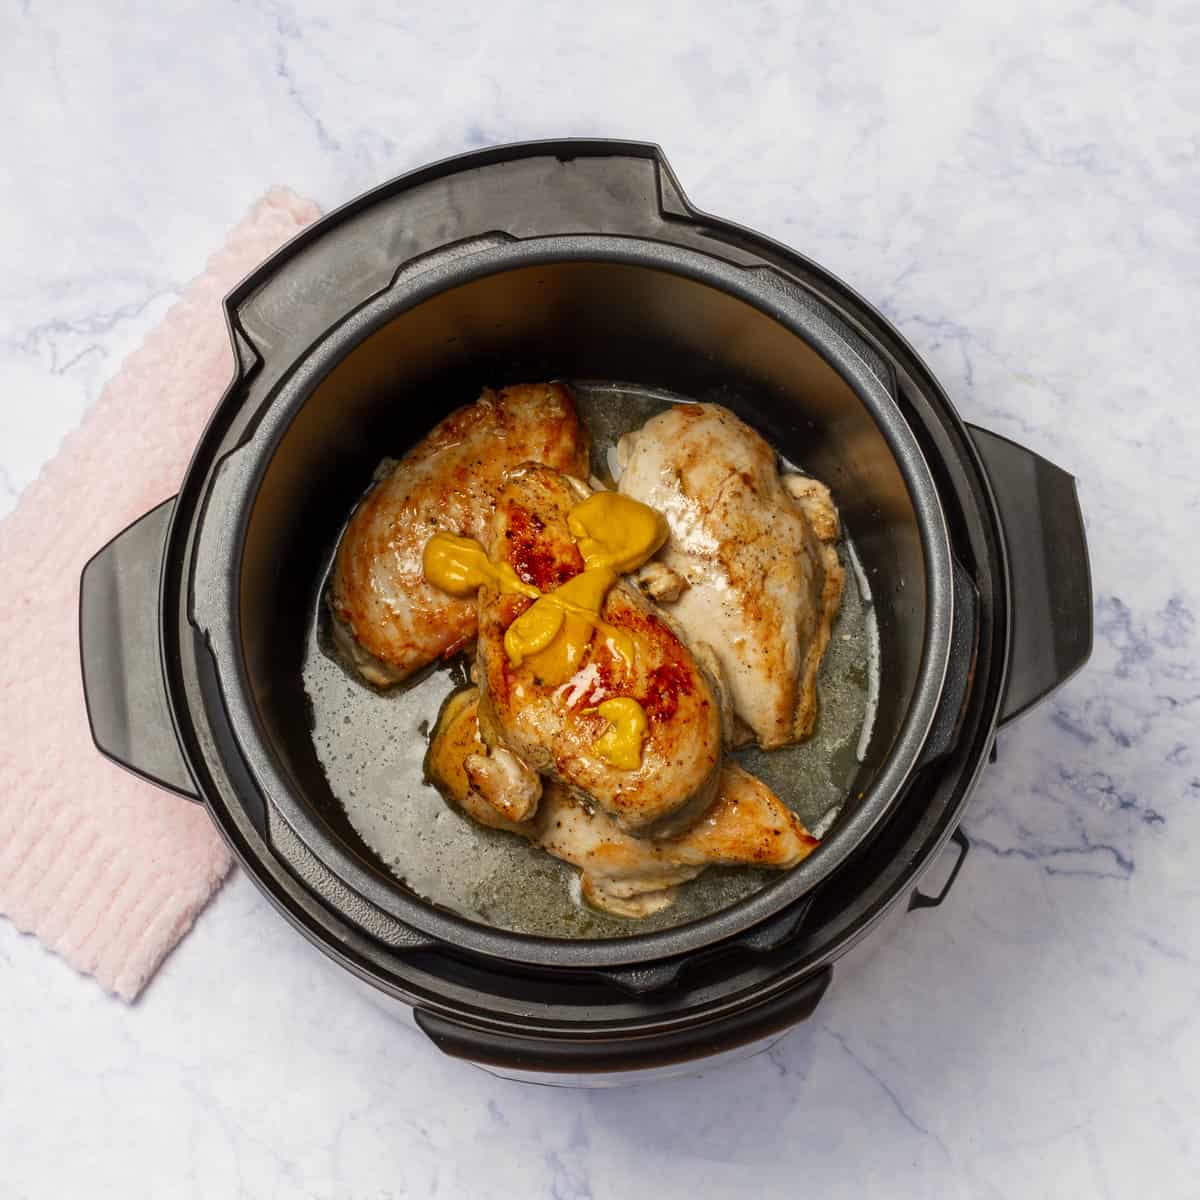 Instant pot with breast chicken and add the mustard, honey, Splenda, and chicken broth